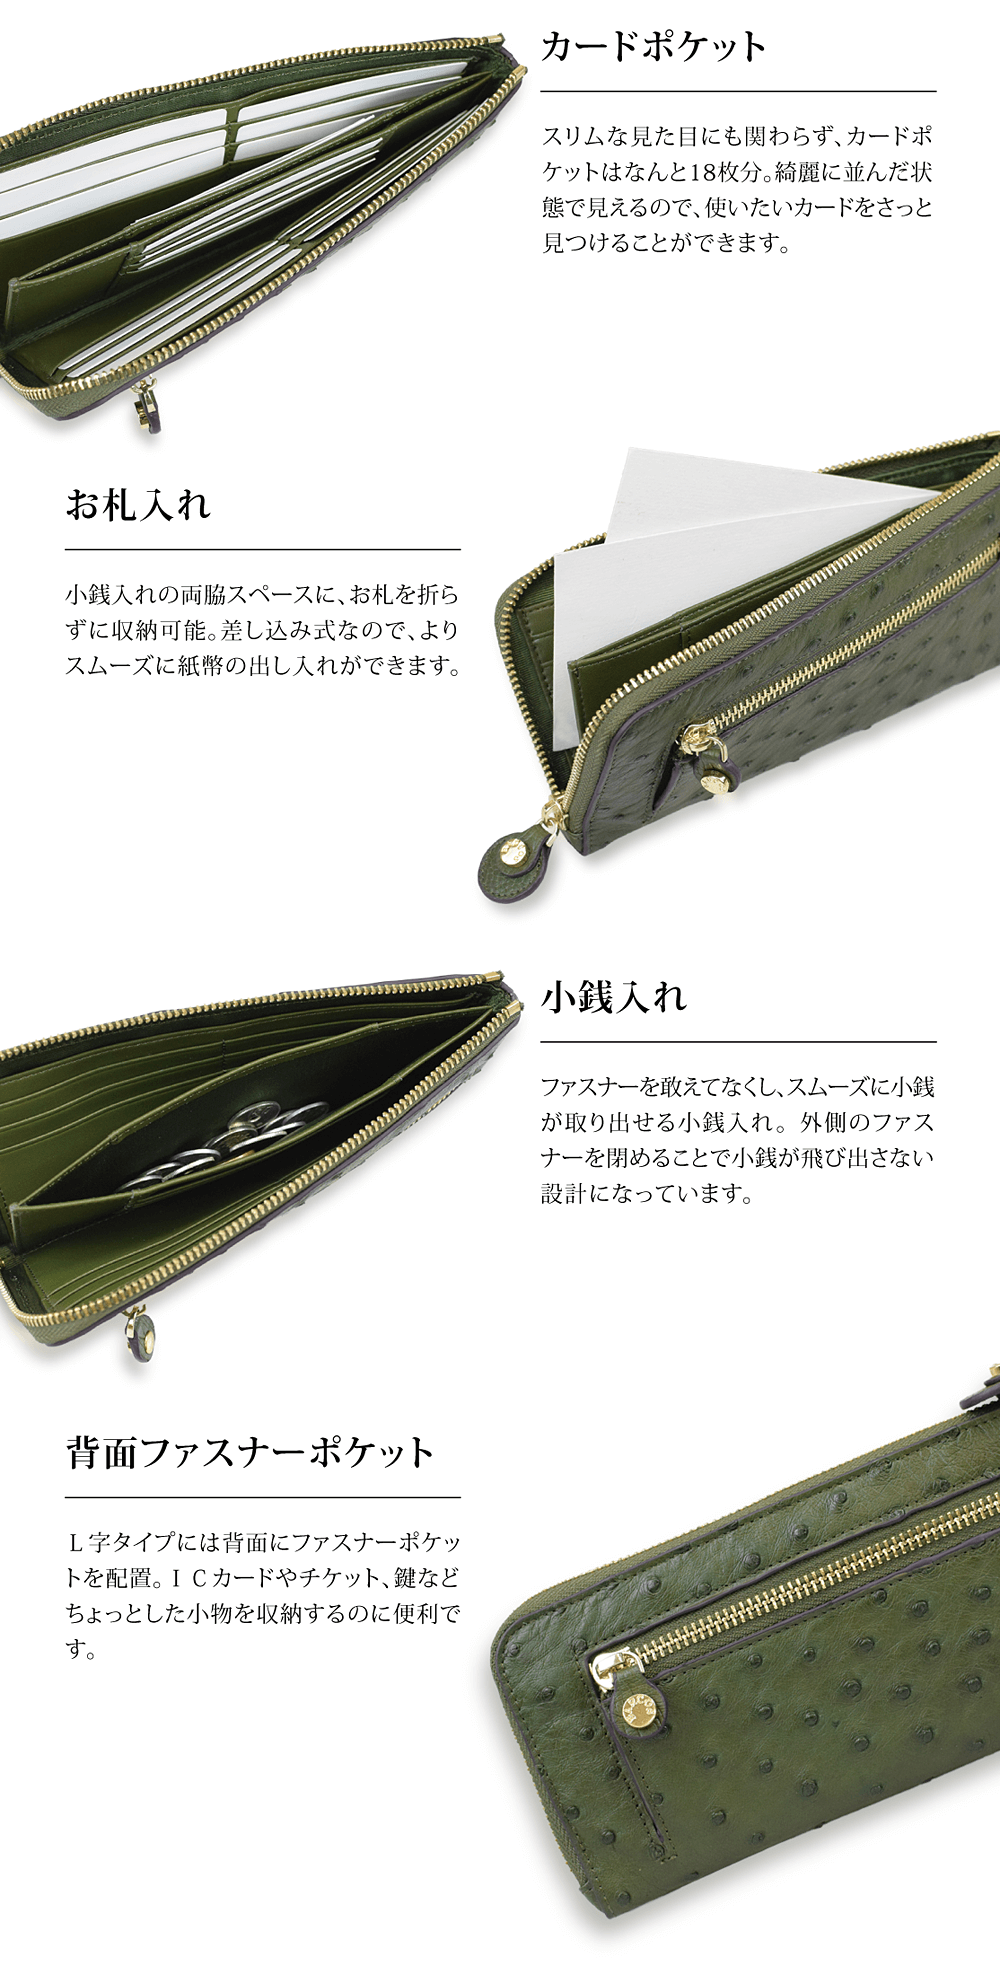 BARCOS Good Luck Wallet 2021 リッコL